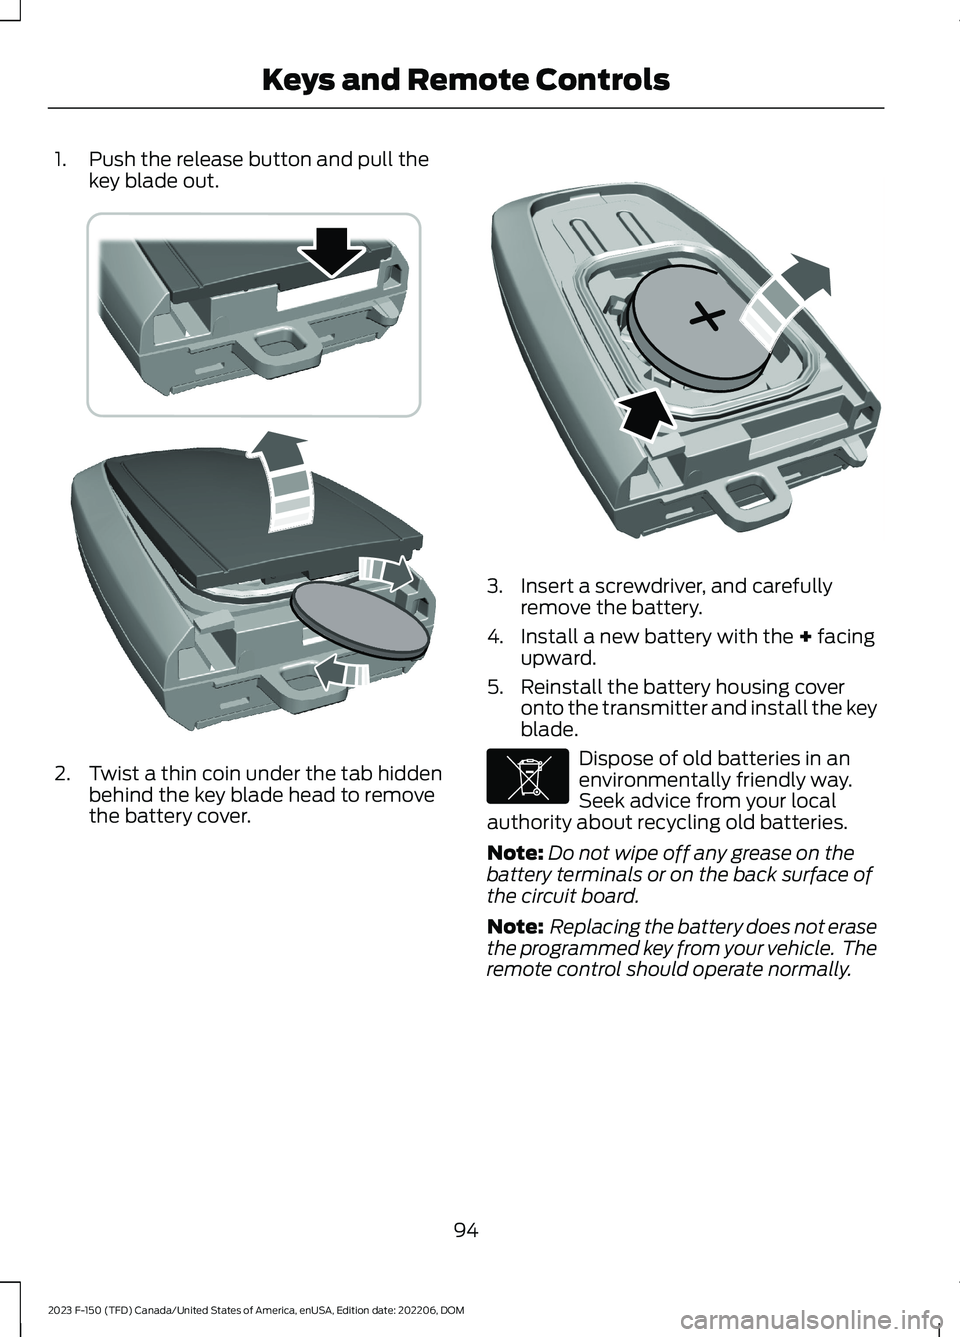 FORD F150 2023  Owners Manual 1.Push the release button and pull thekey blade out.
2.Twist a thin coin under the tab hiddenbehind the key blade head to removethe battery cover.
3.Insert a screwdriver, and carefullyremove the batte